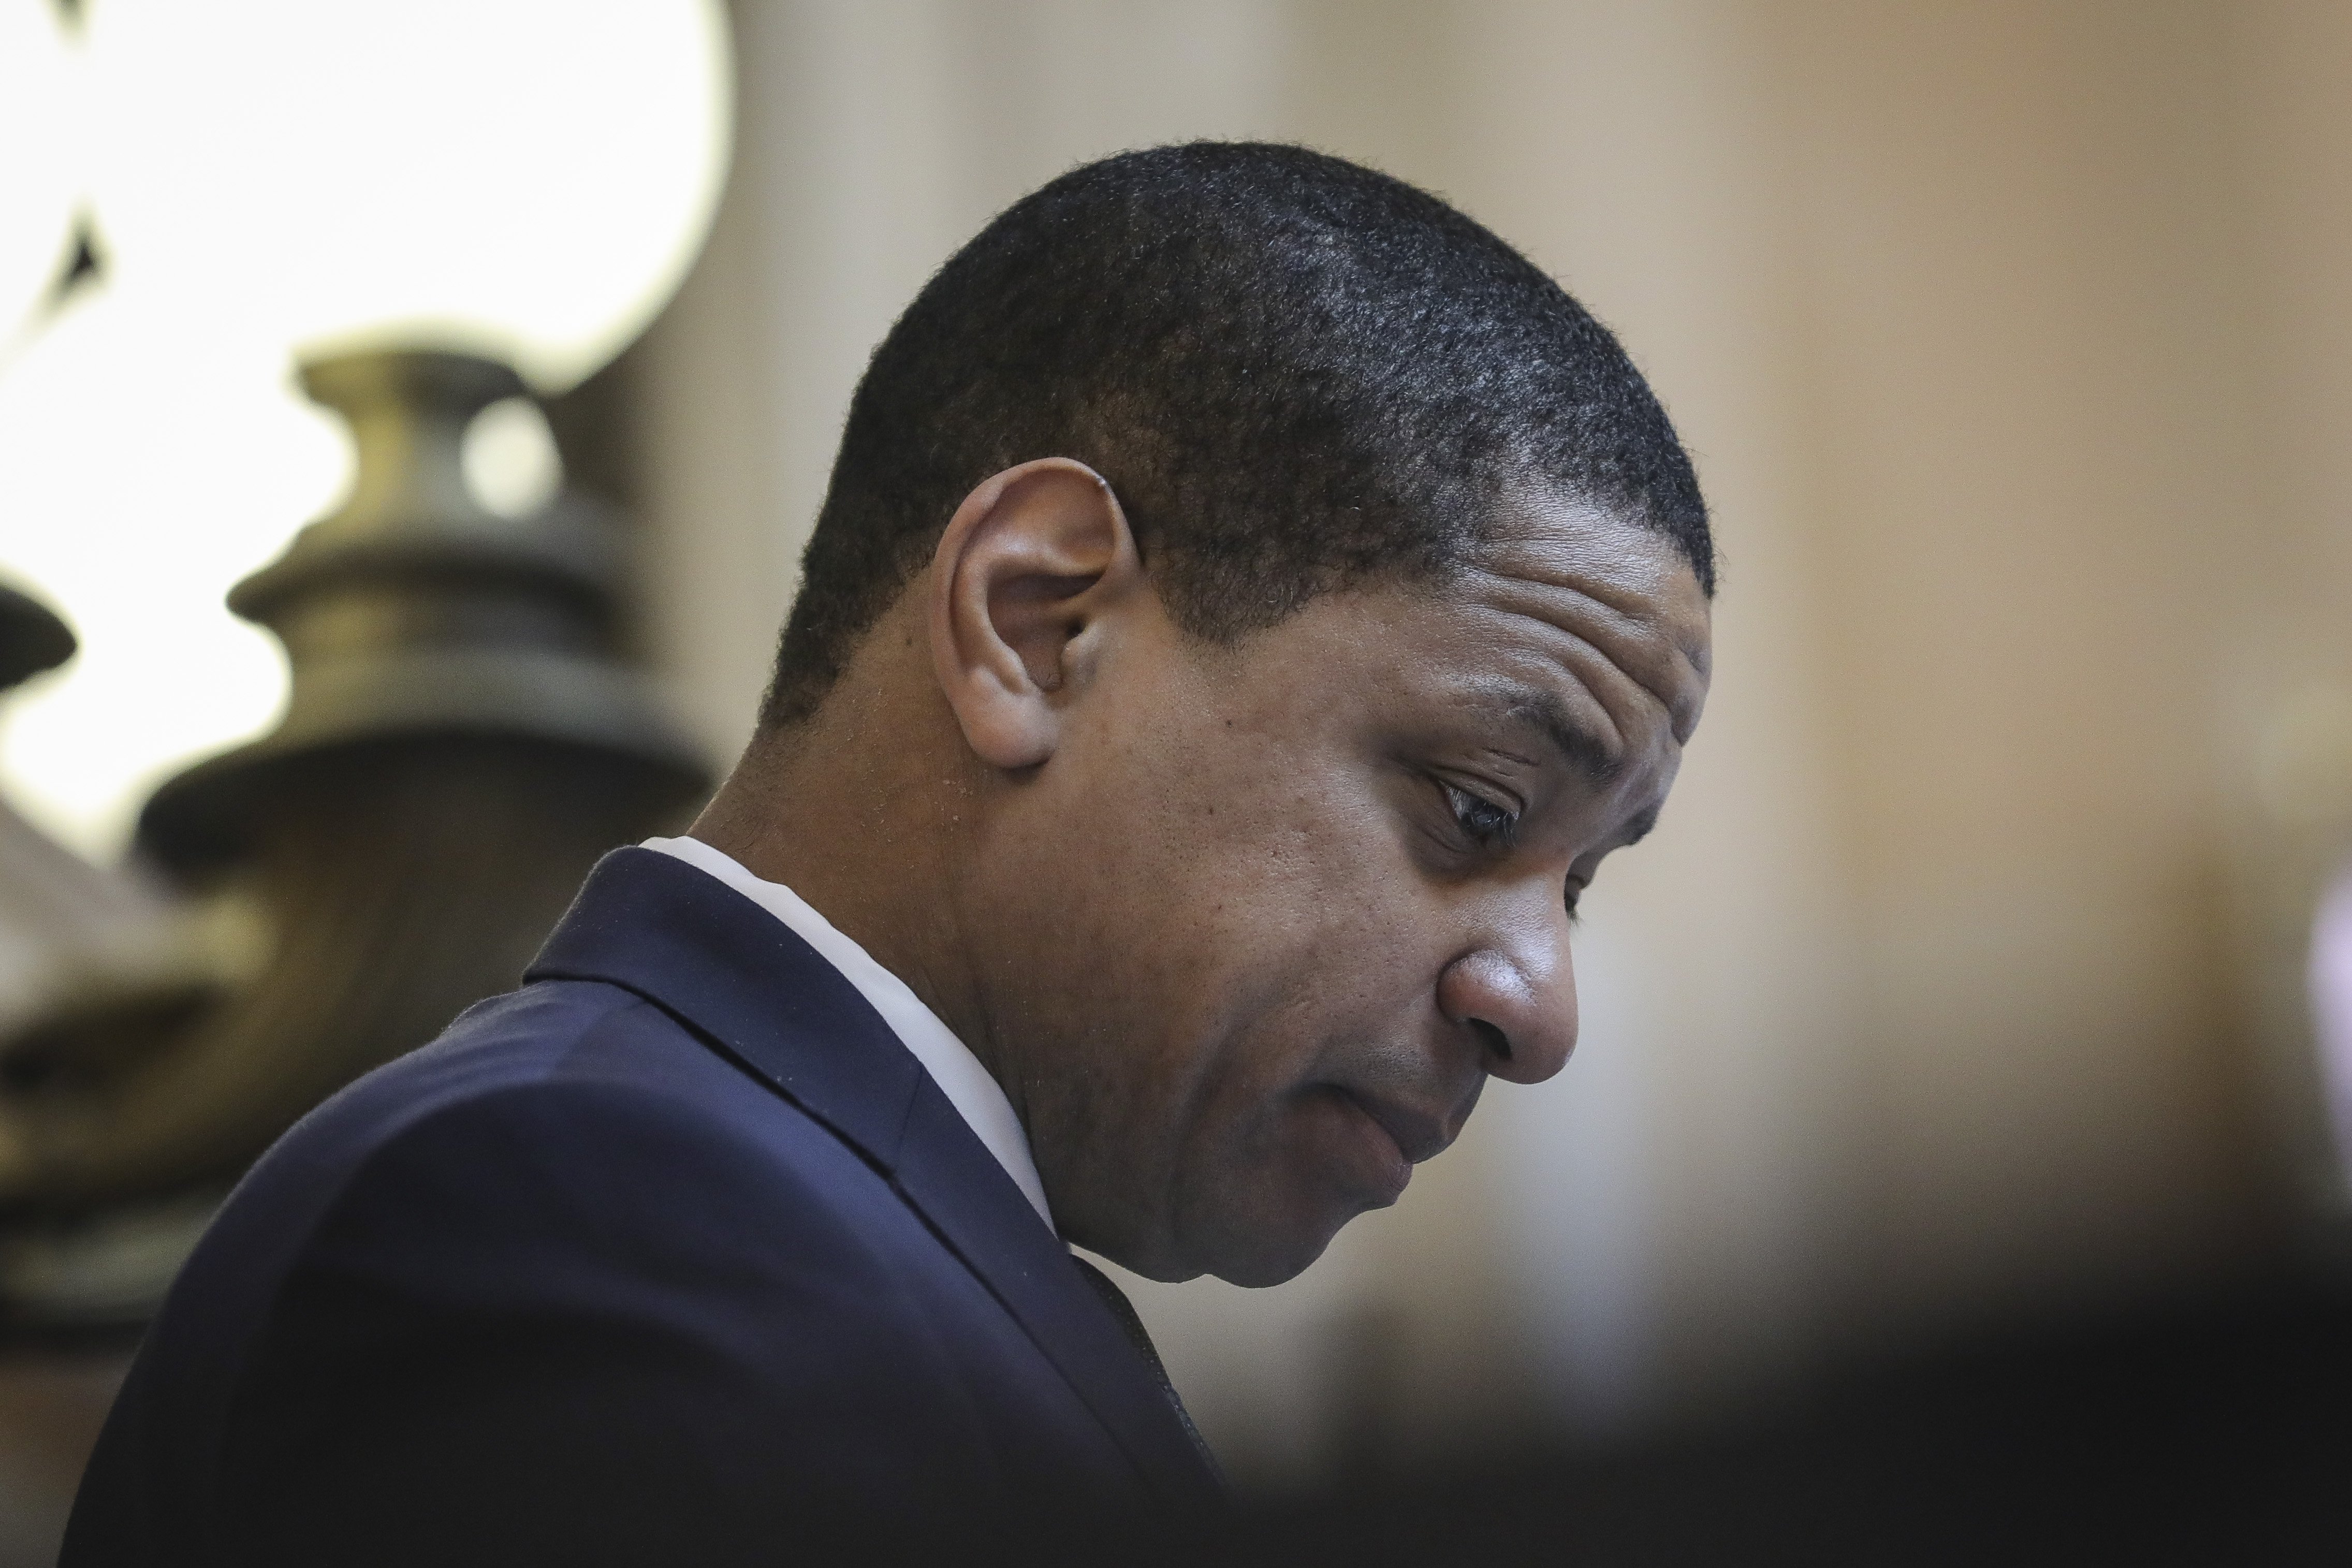 Virginia Lt. Governor Justin Fairfax presides over the Senate at the Virginia State Capitol, February 7, 2019 in Richmond, Virginia. (Drew Angerer/Getty Images)